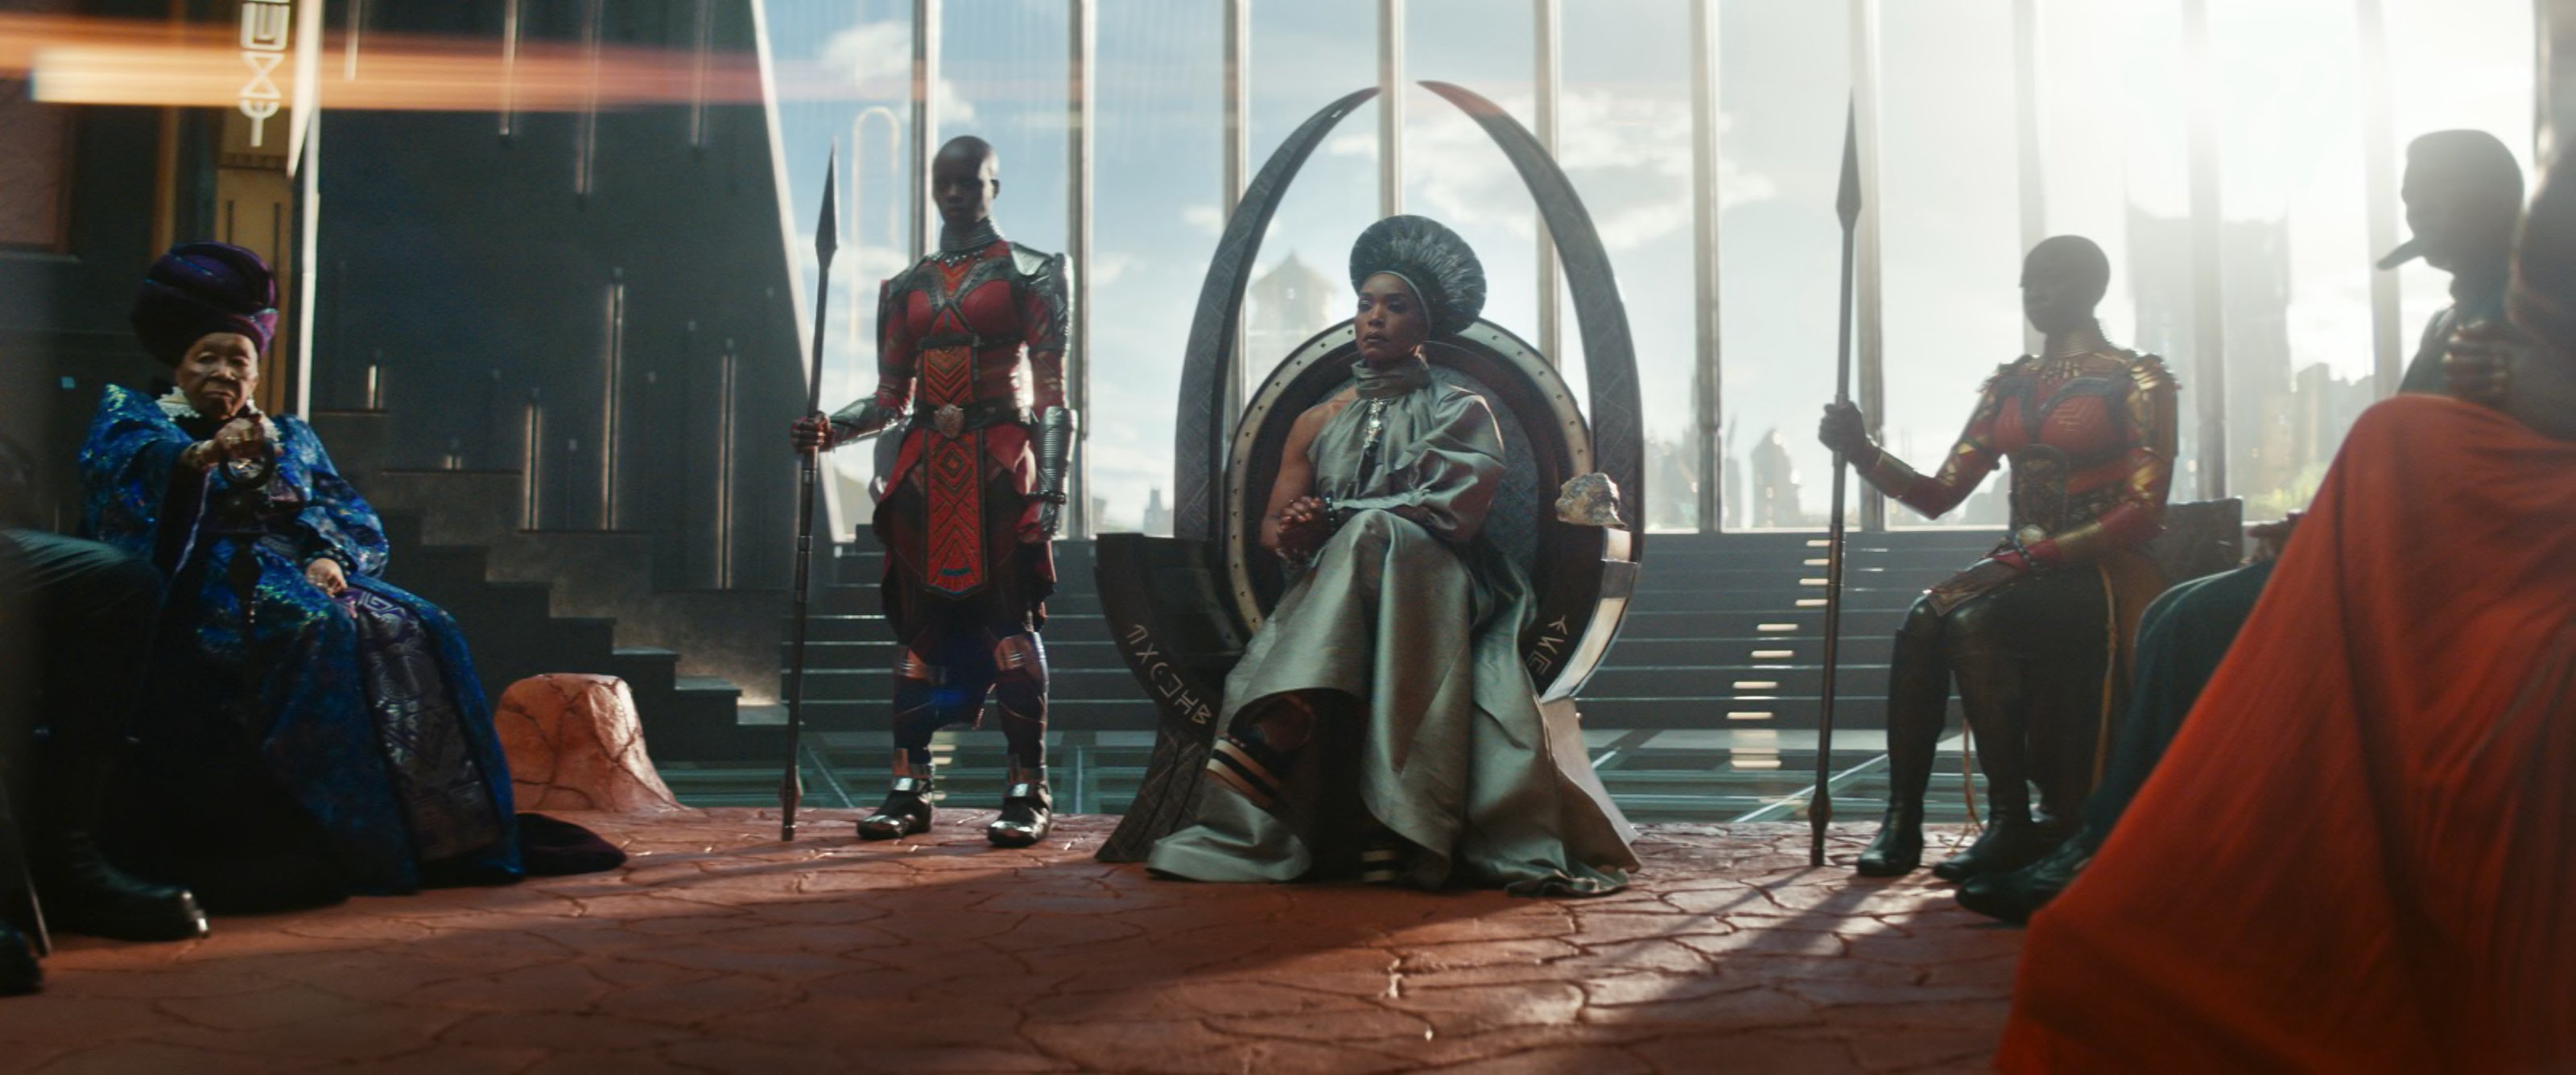 Black Panther 2, Wakanda Forever after credit scene